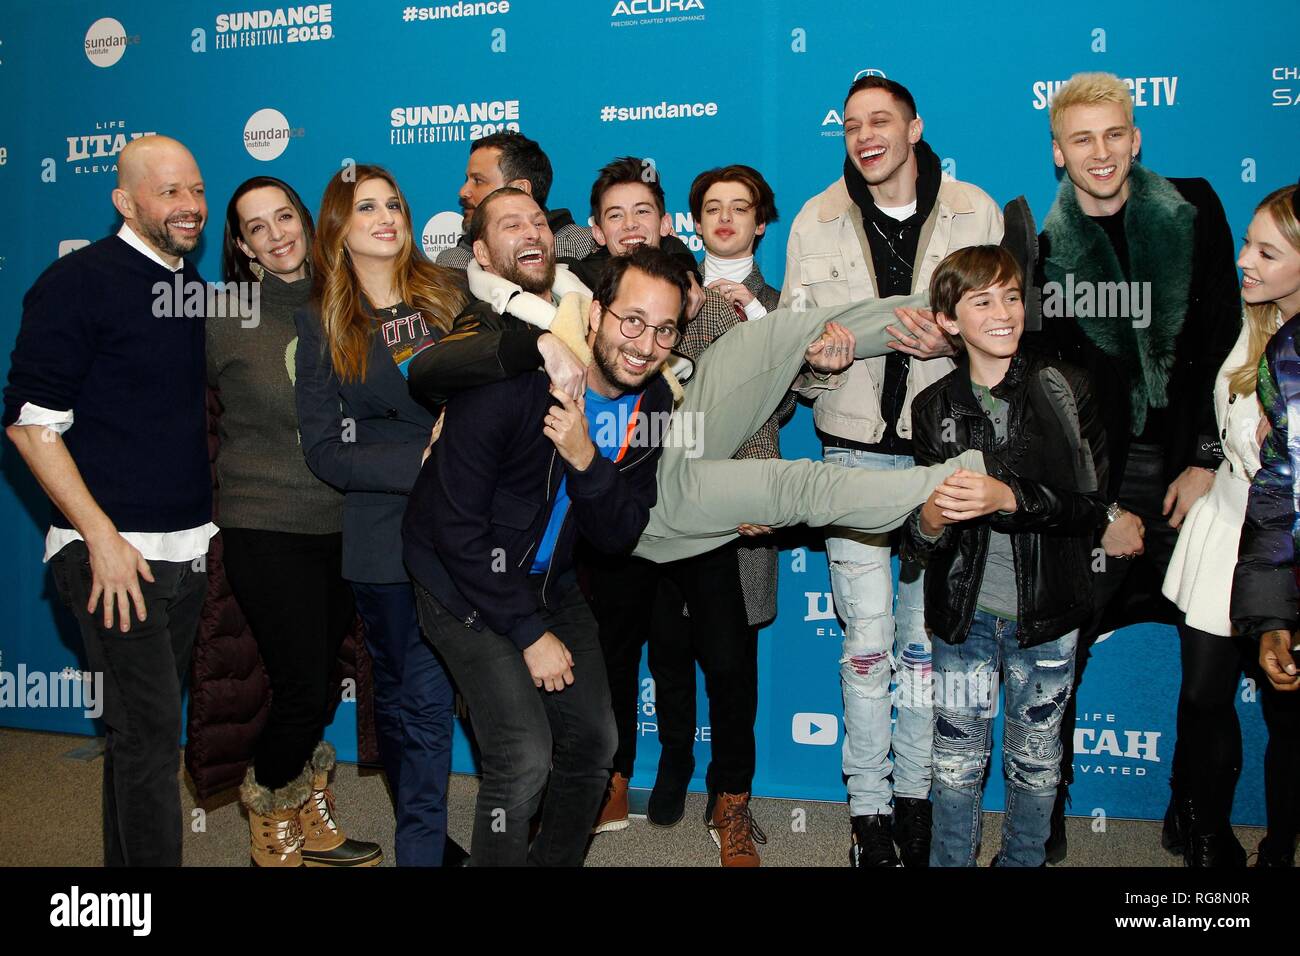 Park City, UT, USA. 28th Jan, 2019. Jon Cryer, Julia Murney, Emily Arlook, Jeremy Garelick, Jason Orley, Joey Gay, Griffin Gluck, Thomas Barbusca, Pete Davidson, Aiden Arthur, Colson Baker (aka 'Machine Gun Kelly'), Sydney Sweeney at arrivals for BIG TIME ADOLESCENCE Premiere at Sundance Film Festival 2019, George S. and Dolores Eccles Center for the Performing Arts, Park City, UT January 28, 2019. Credit: JA/Everett Collection/Alamy Live News Stock Photo